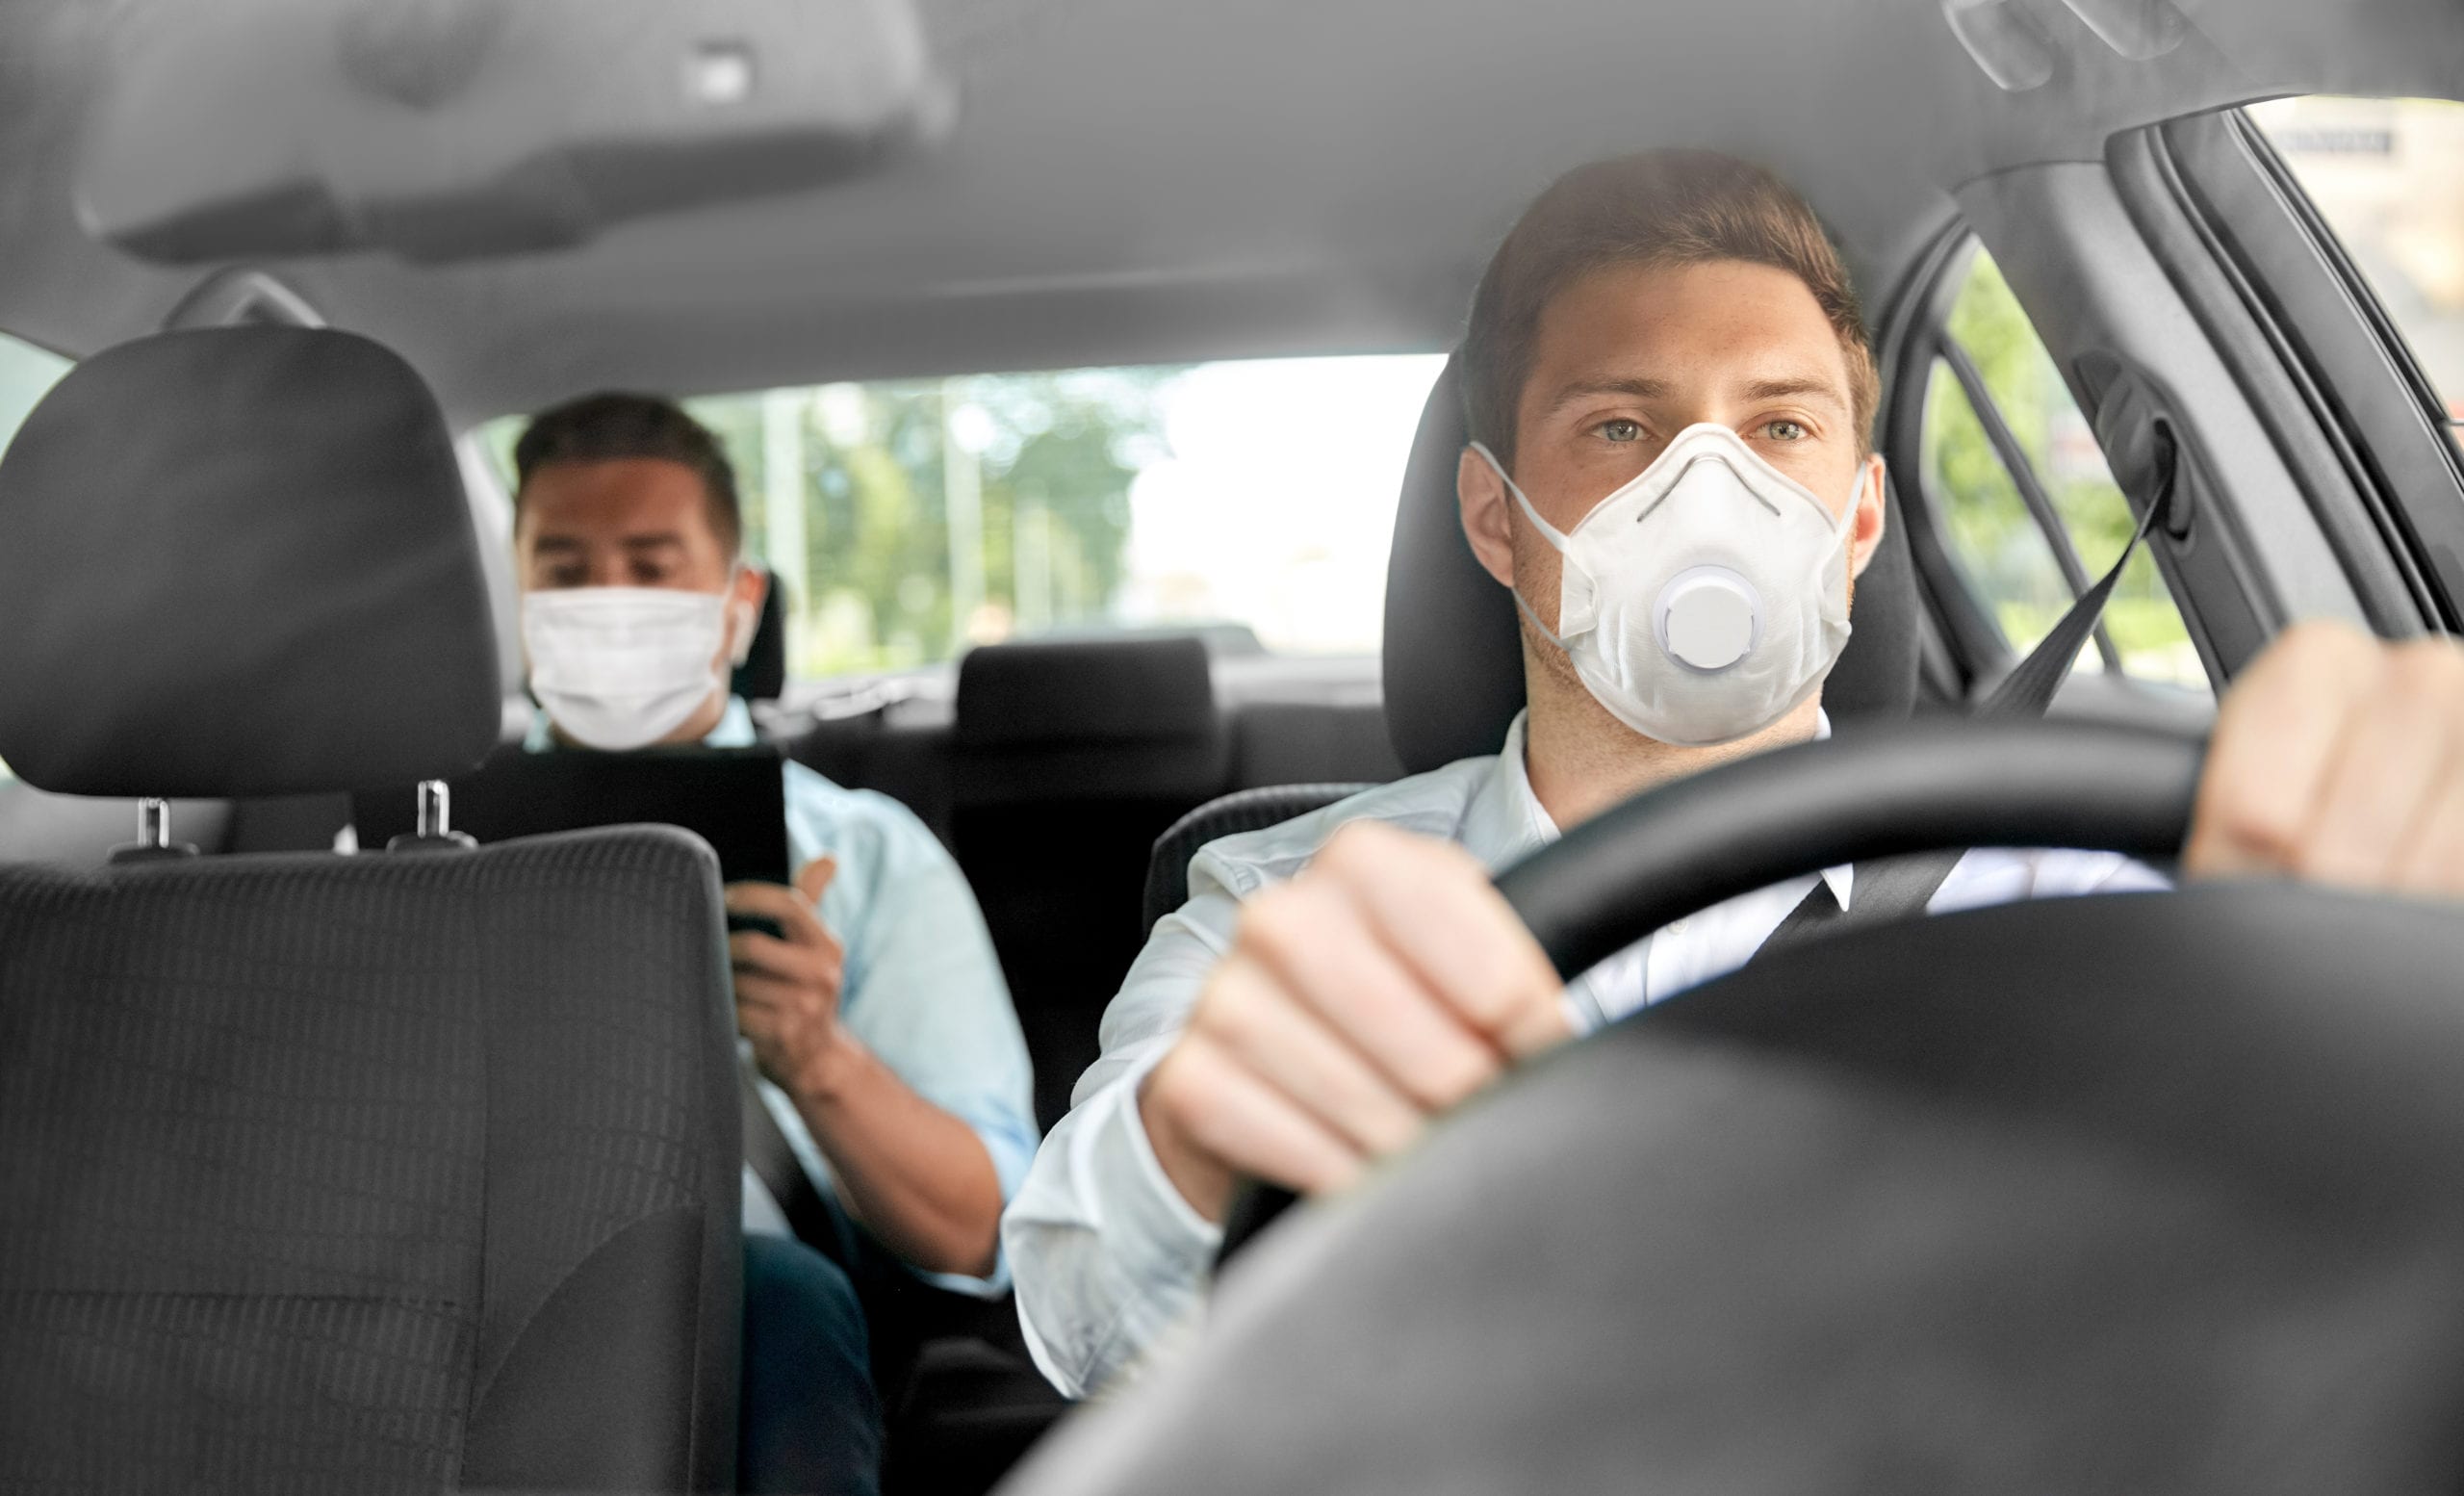 driver and passenger in car wearing protective masks